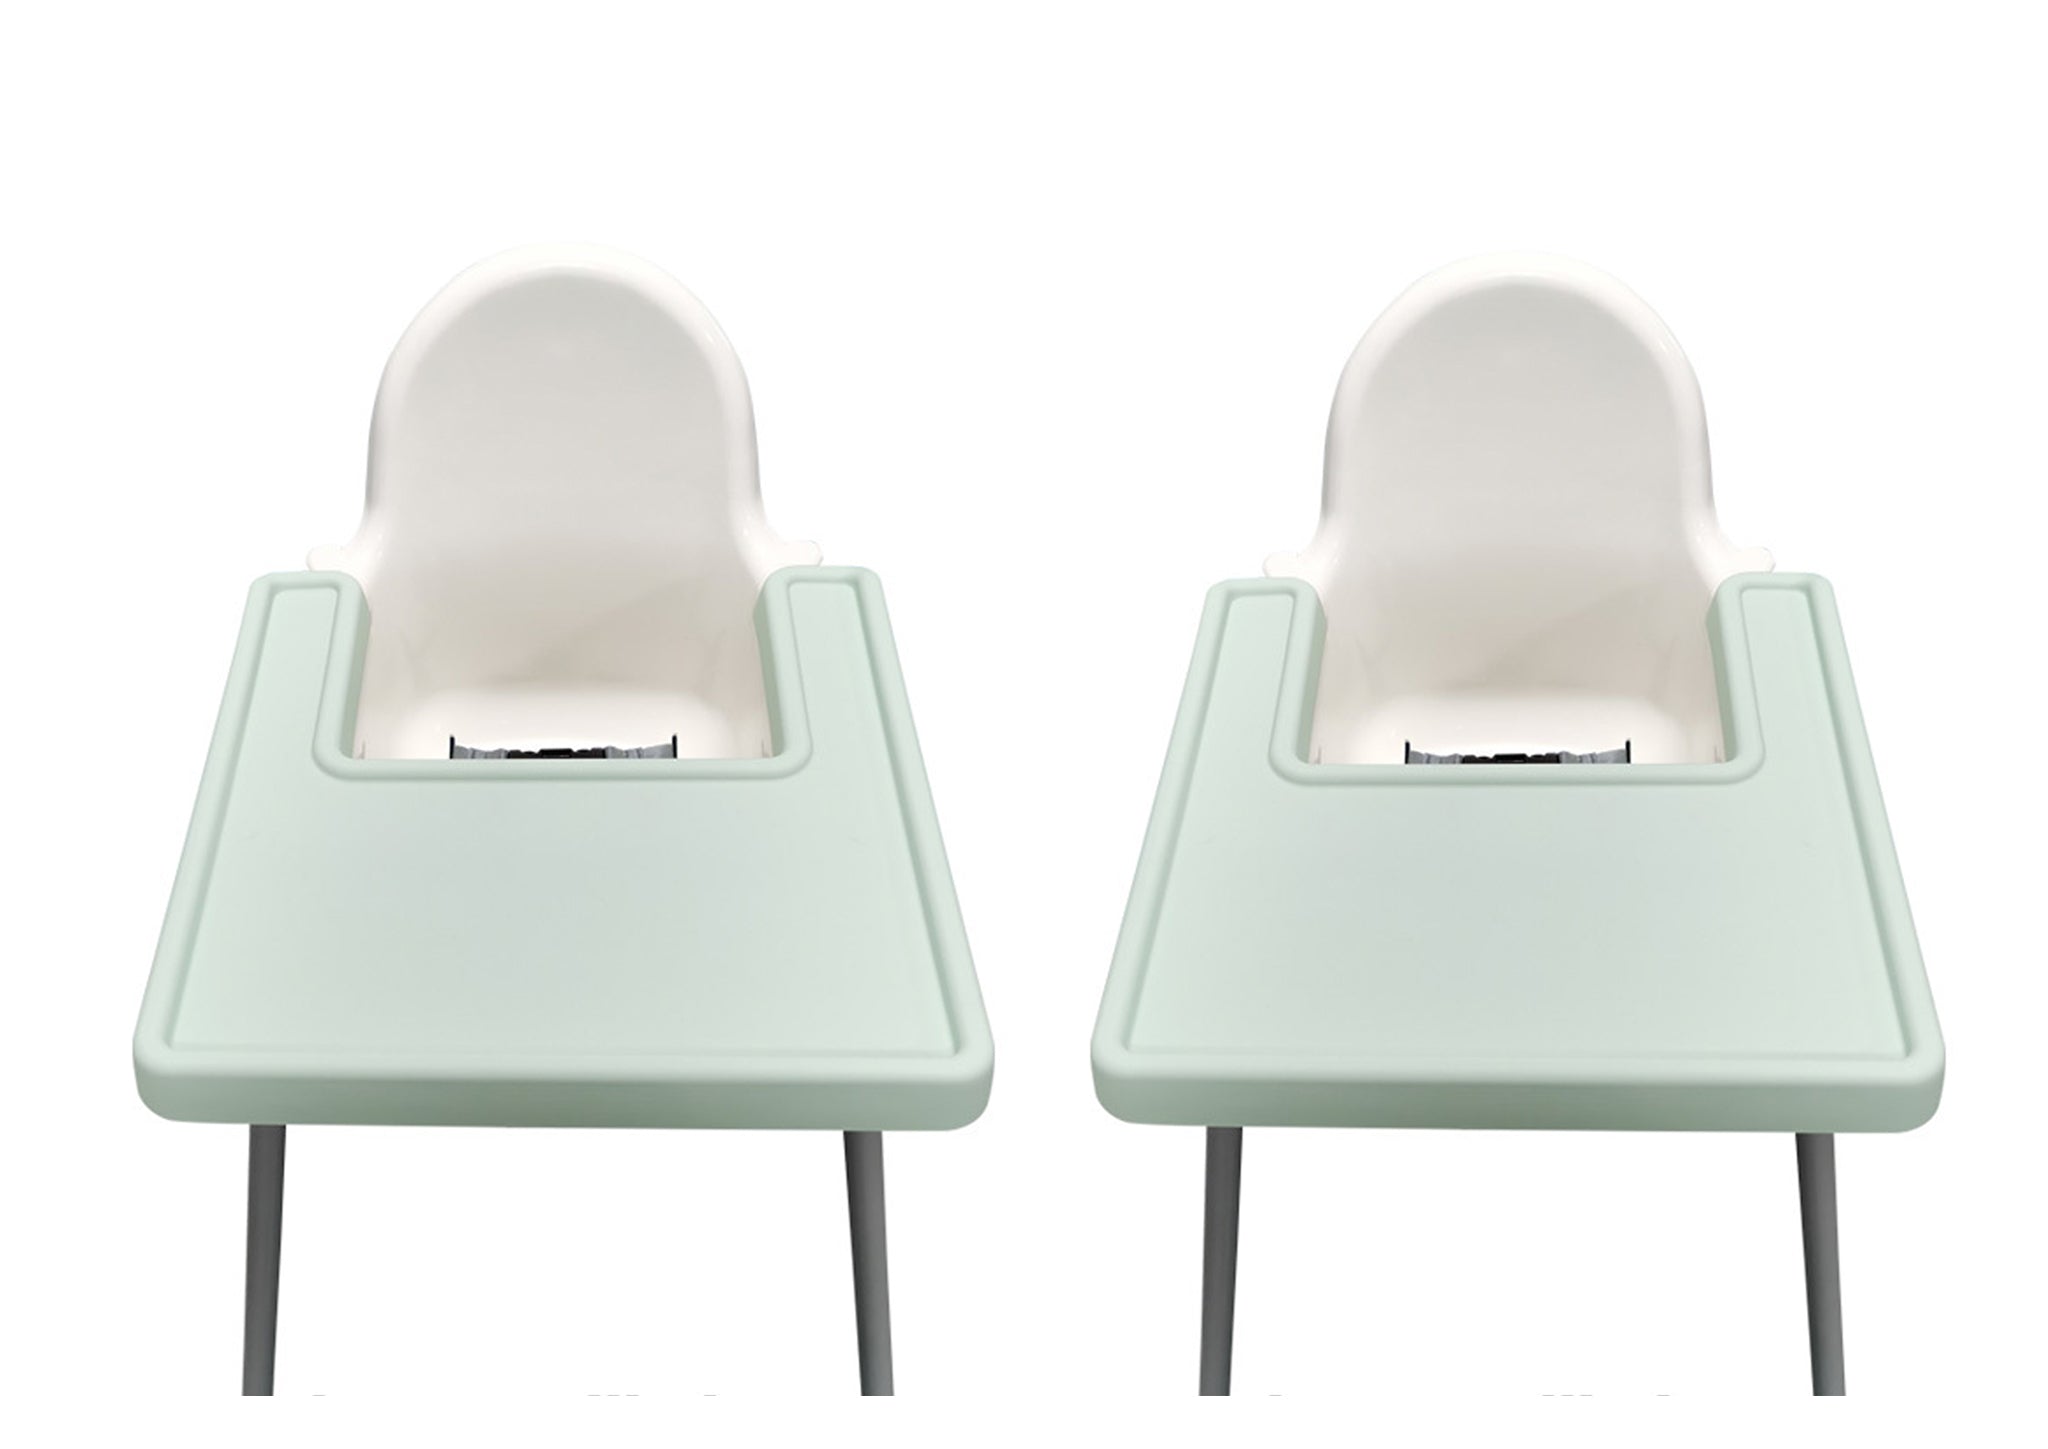 TWIN SET - Highchair Full Tray Cover Mint Green